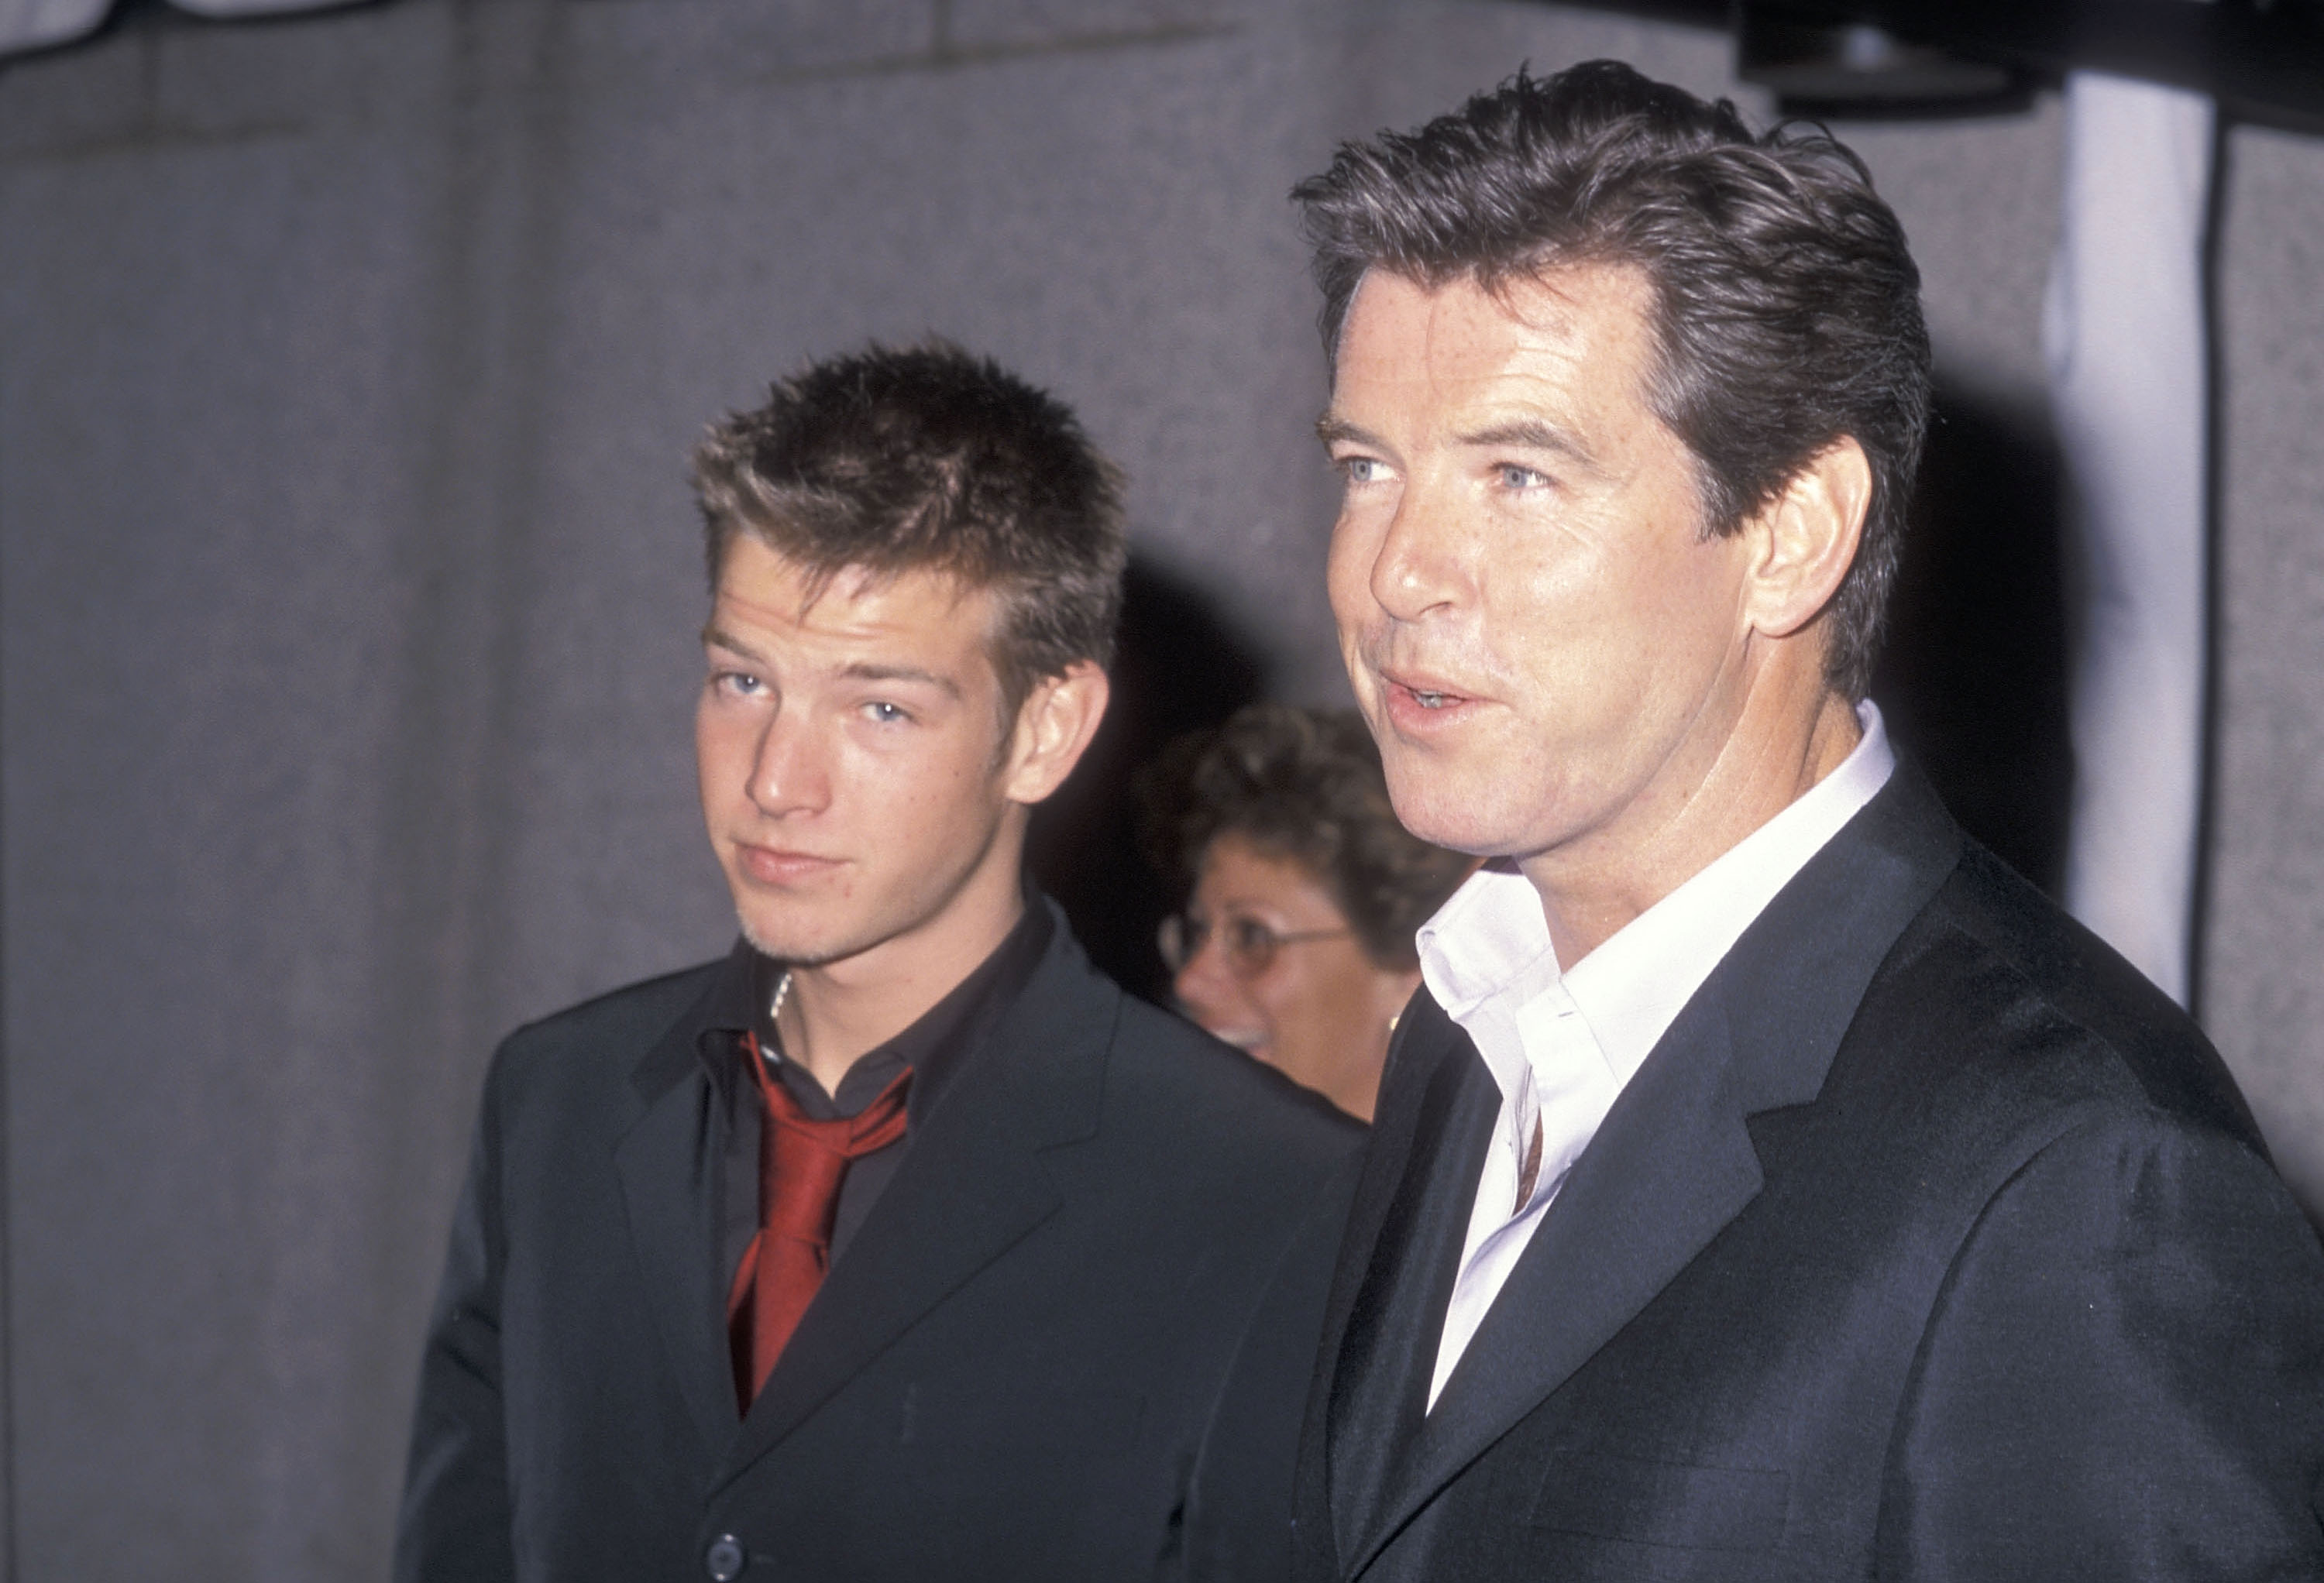 Sean and Pierce Brosnan at the Fifth Annual GQ Men of the Year Awards in New York City, 2000. | Source: Getty Images